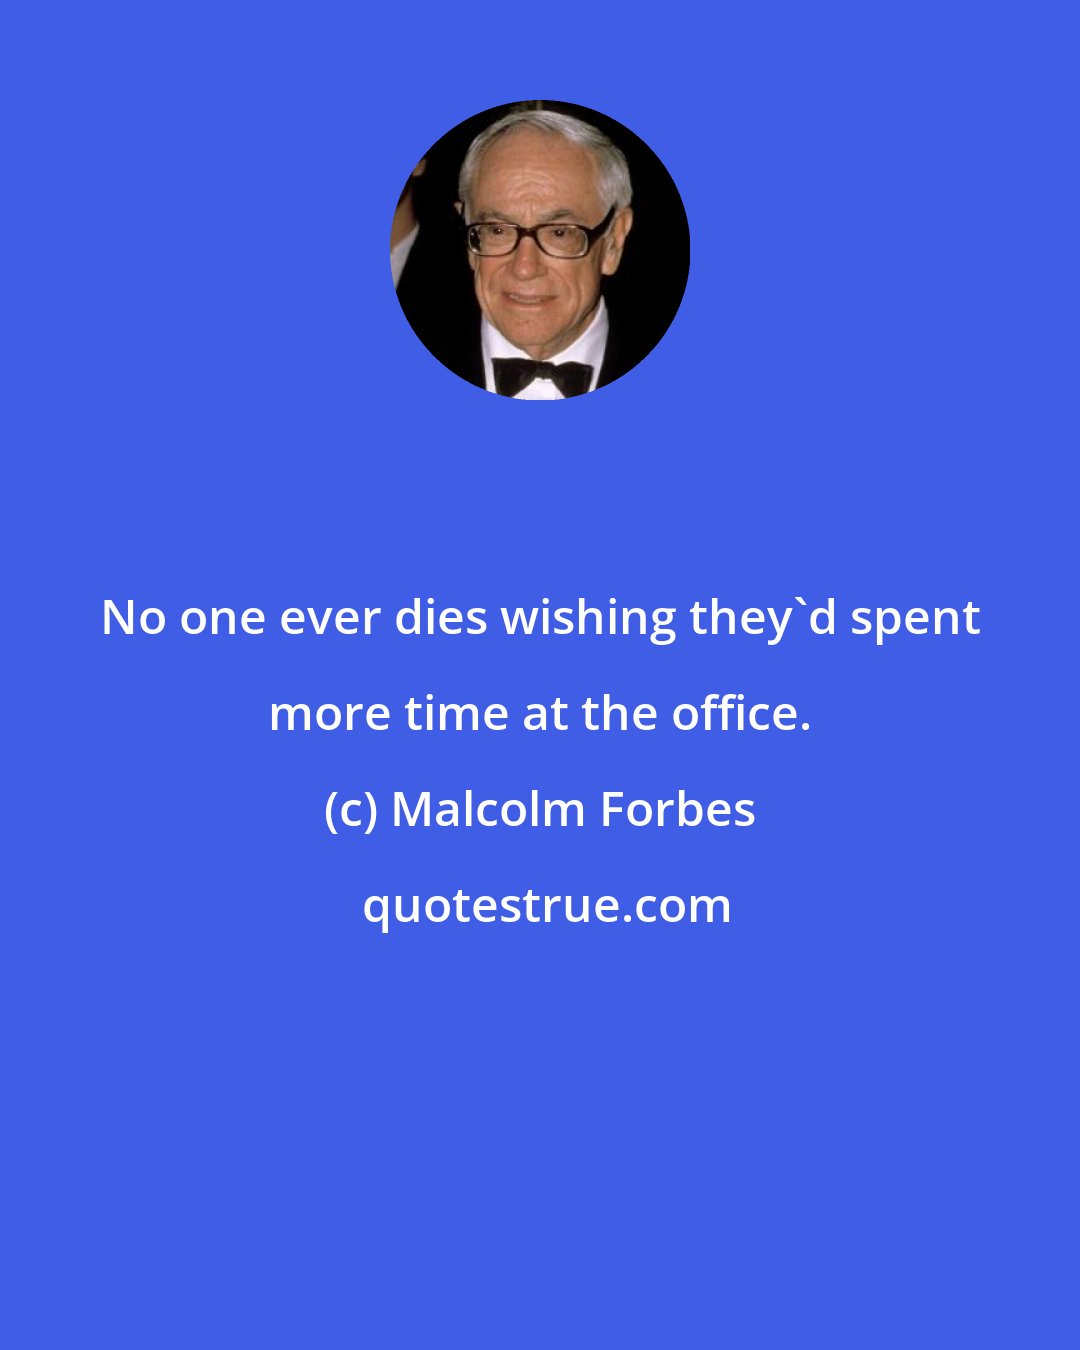 Malcolm Forbes: No one ever dies wishing they'd spent more time at the office.